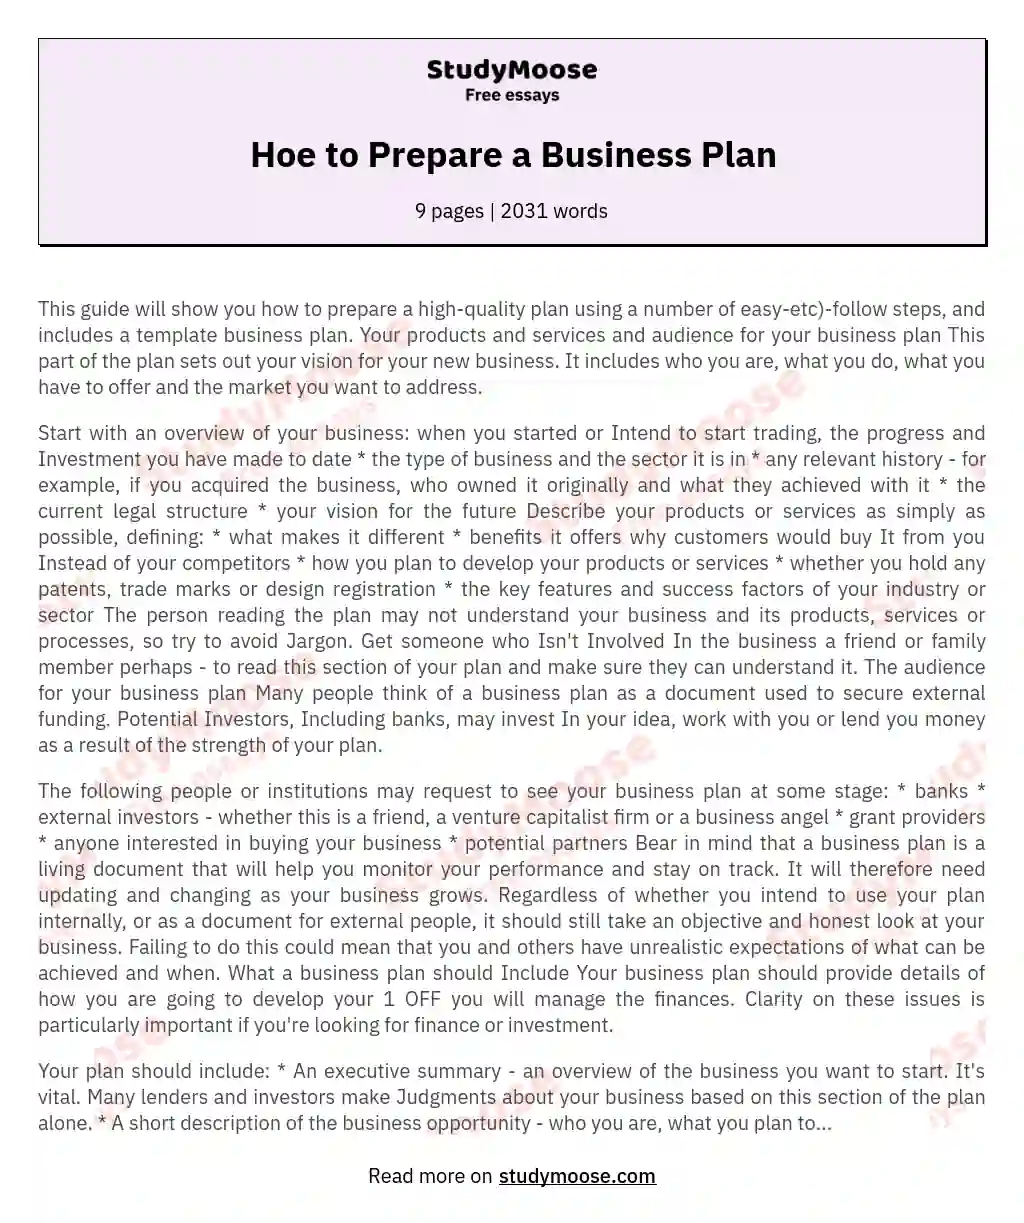 Hoe to Prepare a Business Plan essay